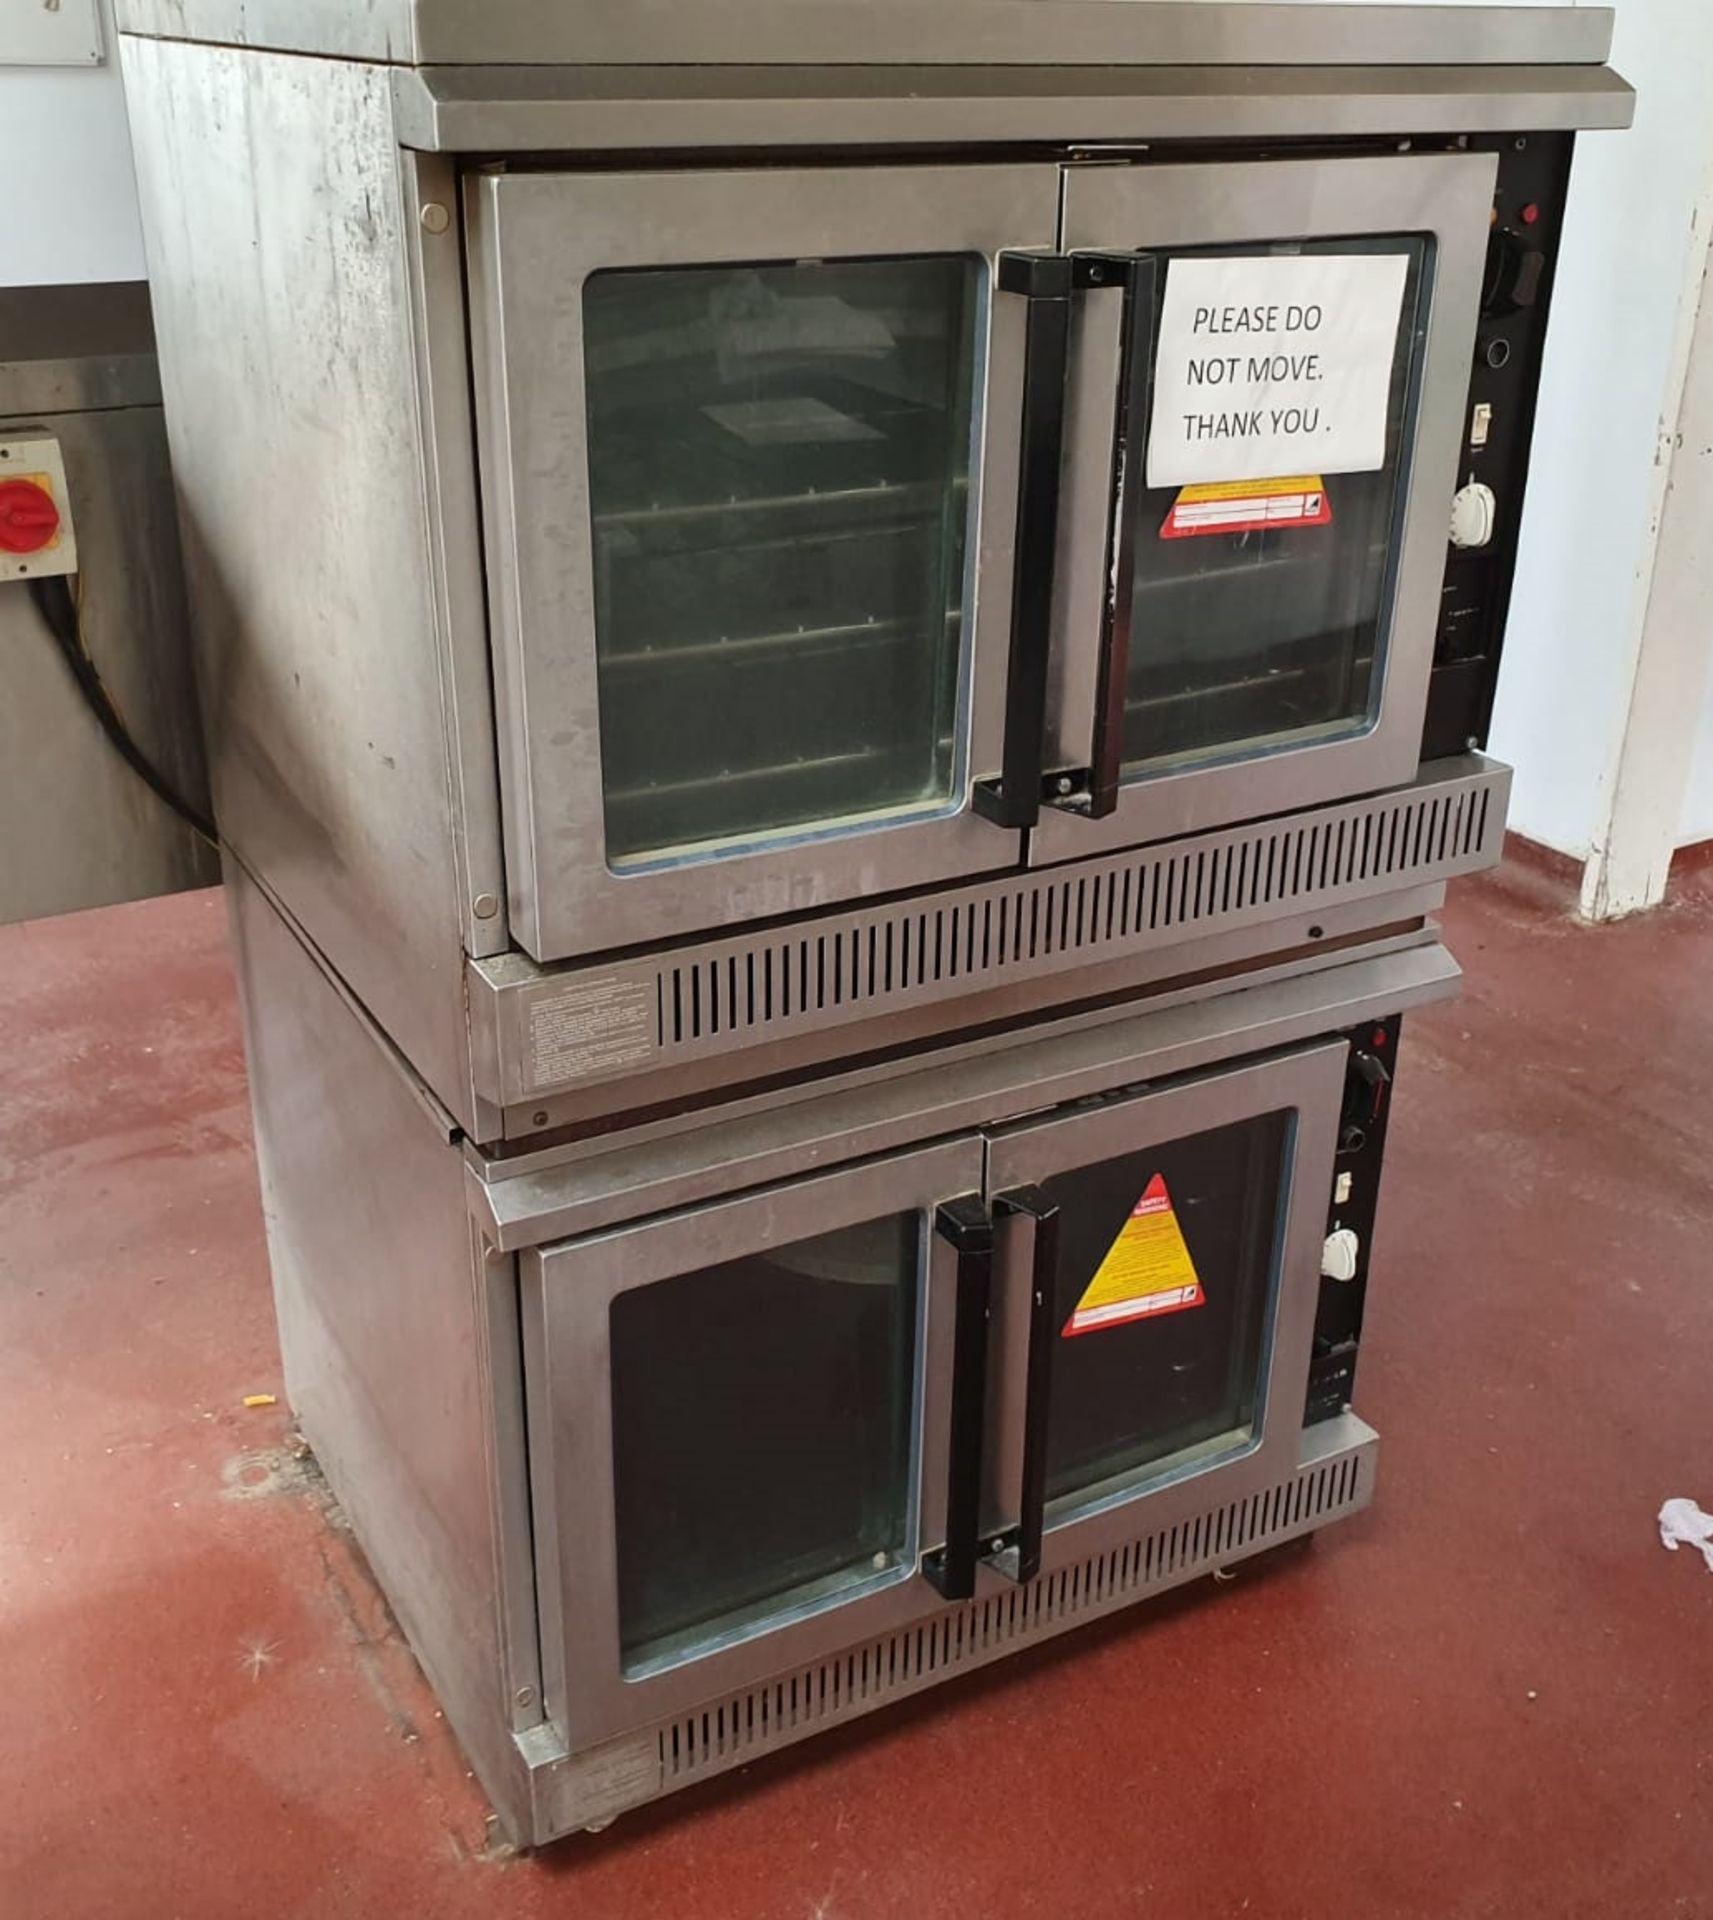 1 x Falcon Natural Gas Twin Convection Oven With Stainless Steel Exterior - 230V - Model G1112/2 - - Image 4 of 4